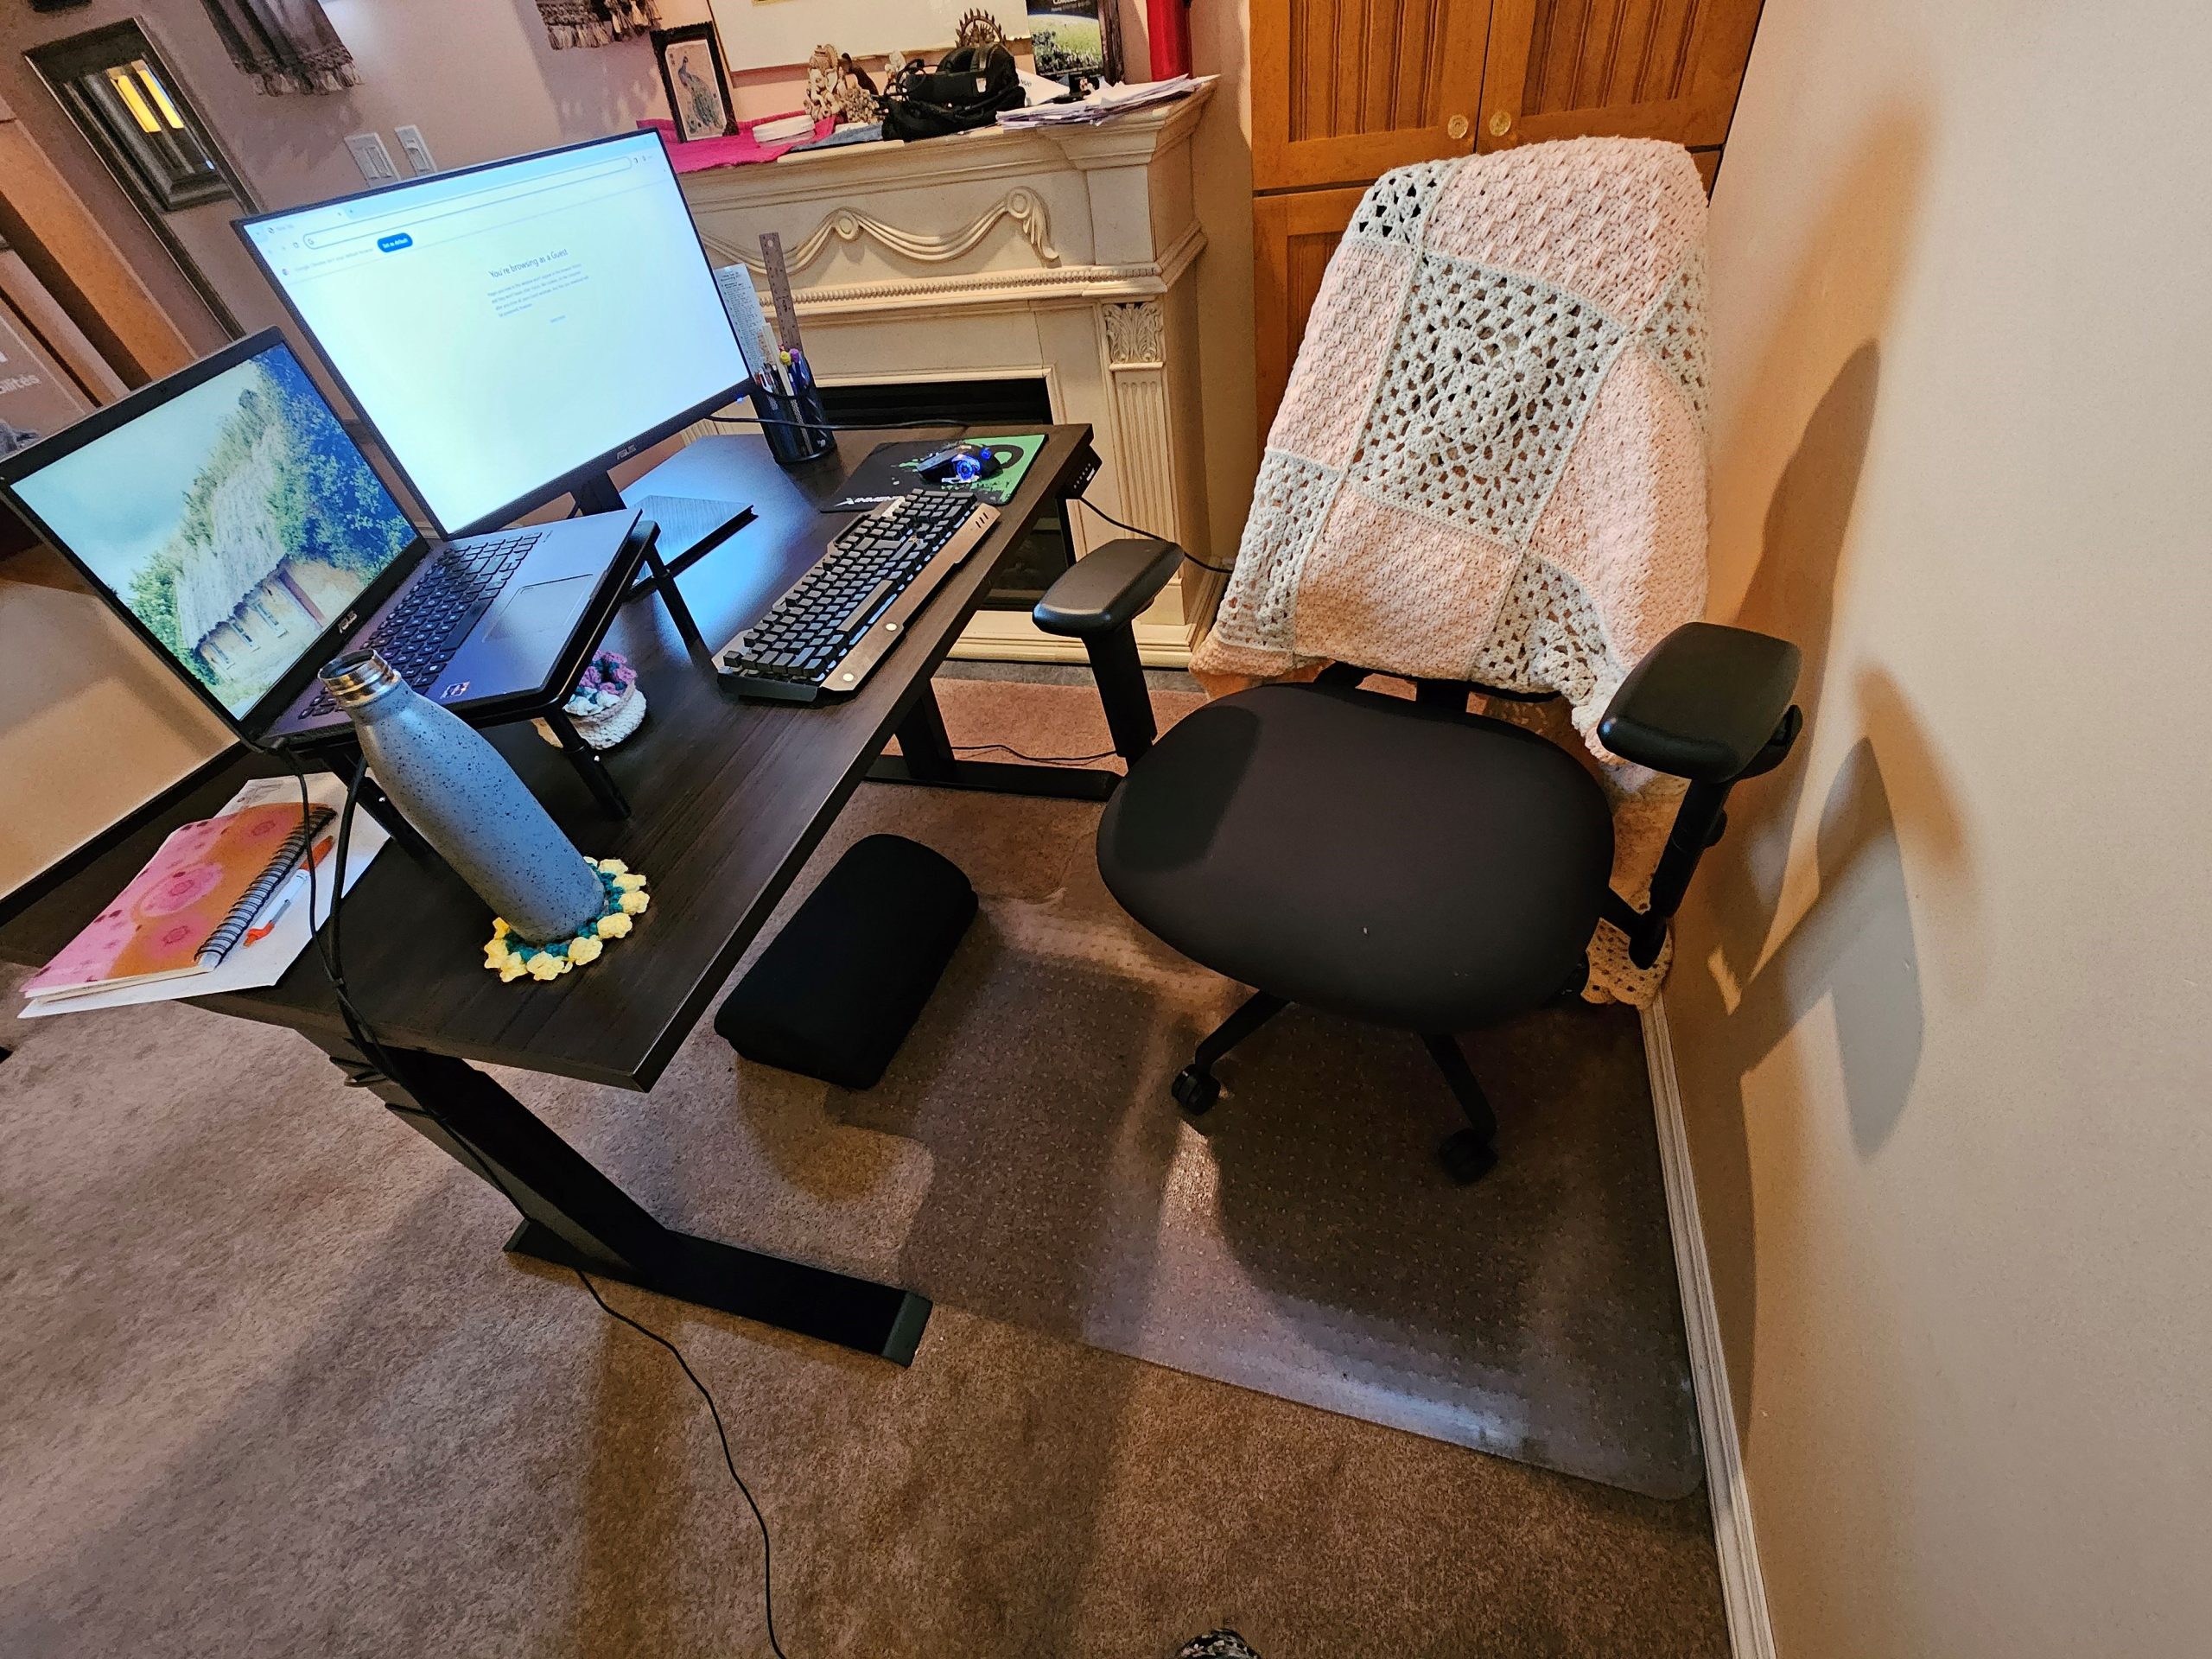 Michelle's workstation, featuring her adjustable chair, sit/stand desk, laptop riser, monitor, and other ergonomic supports.